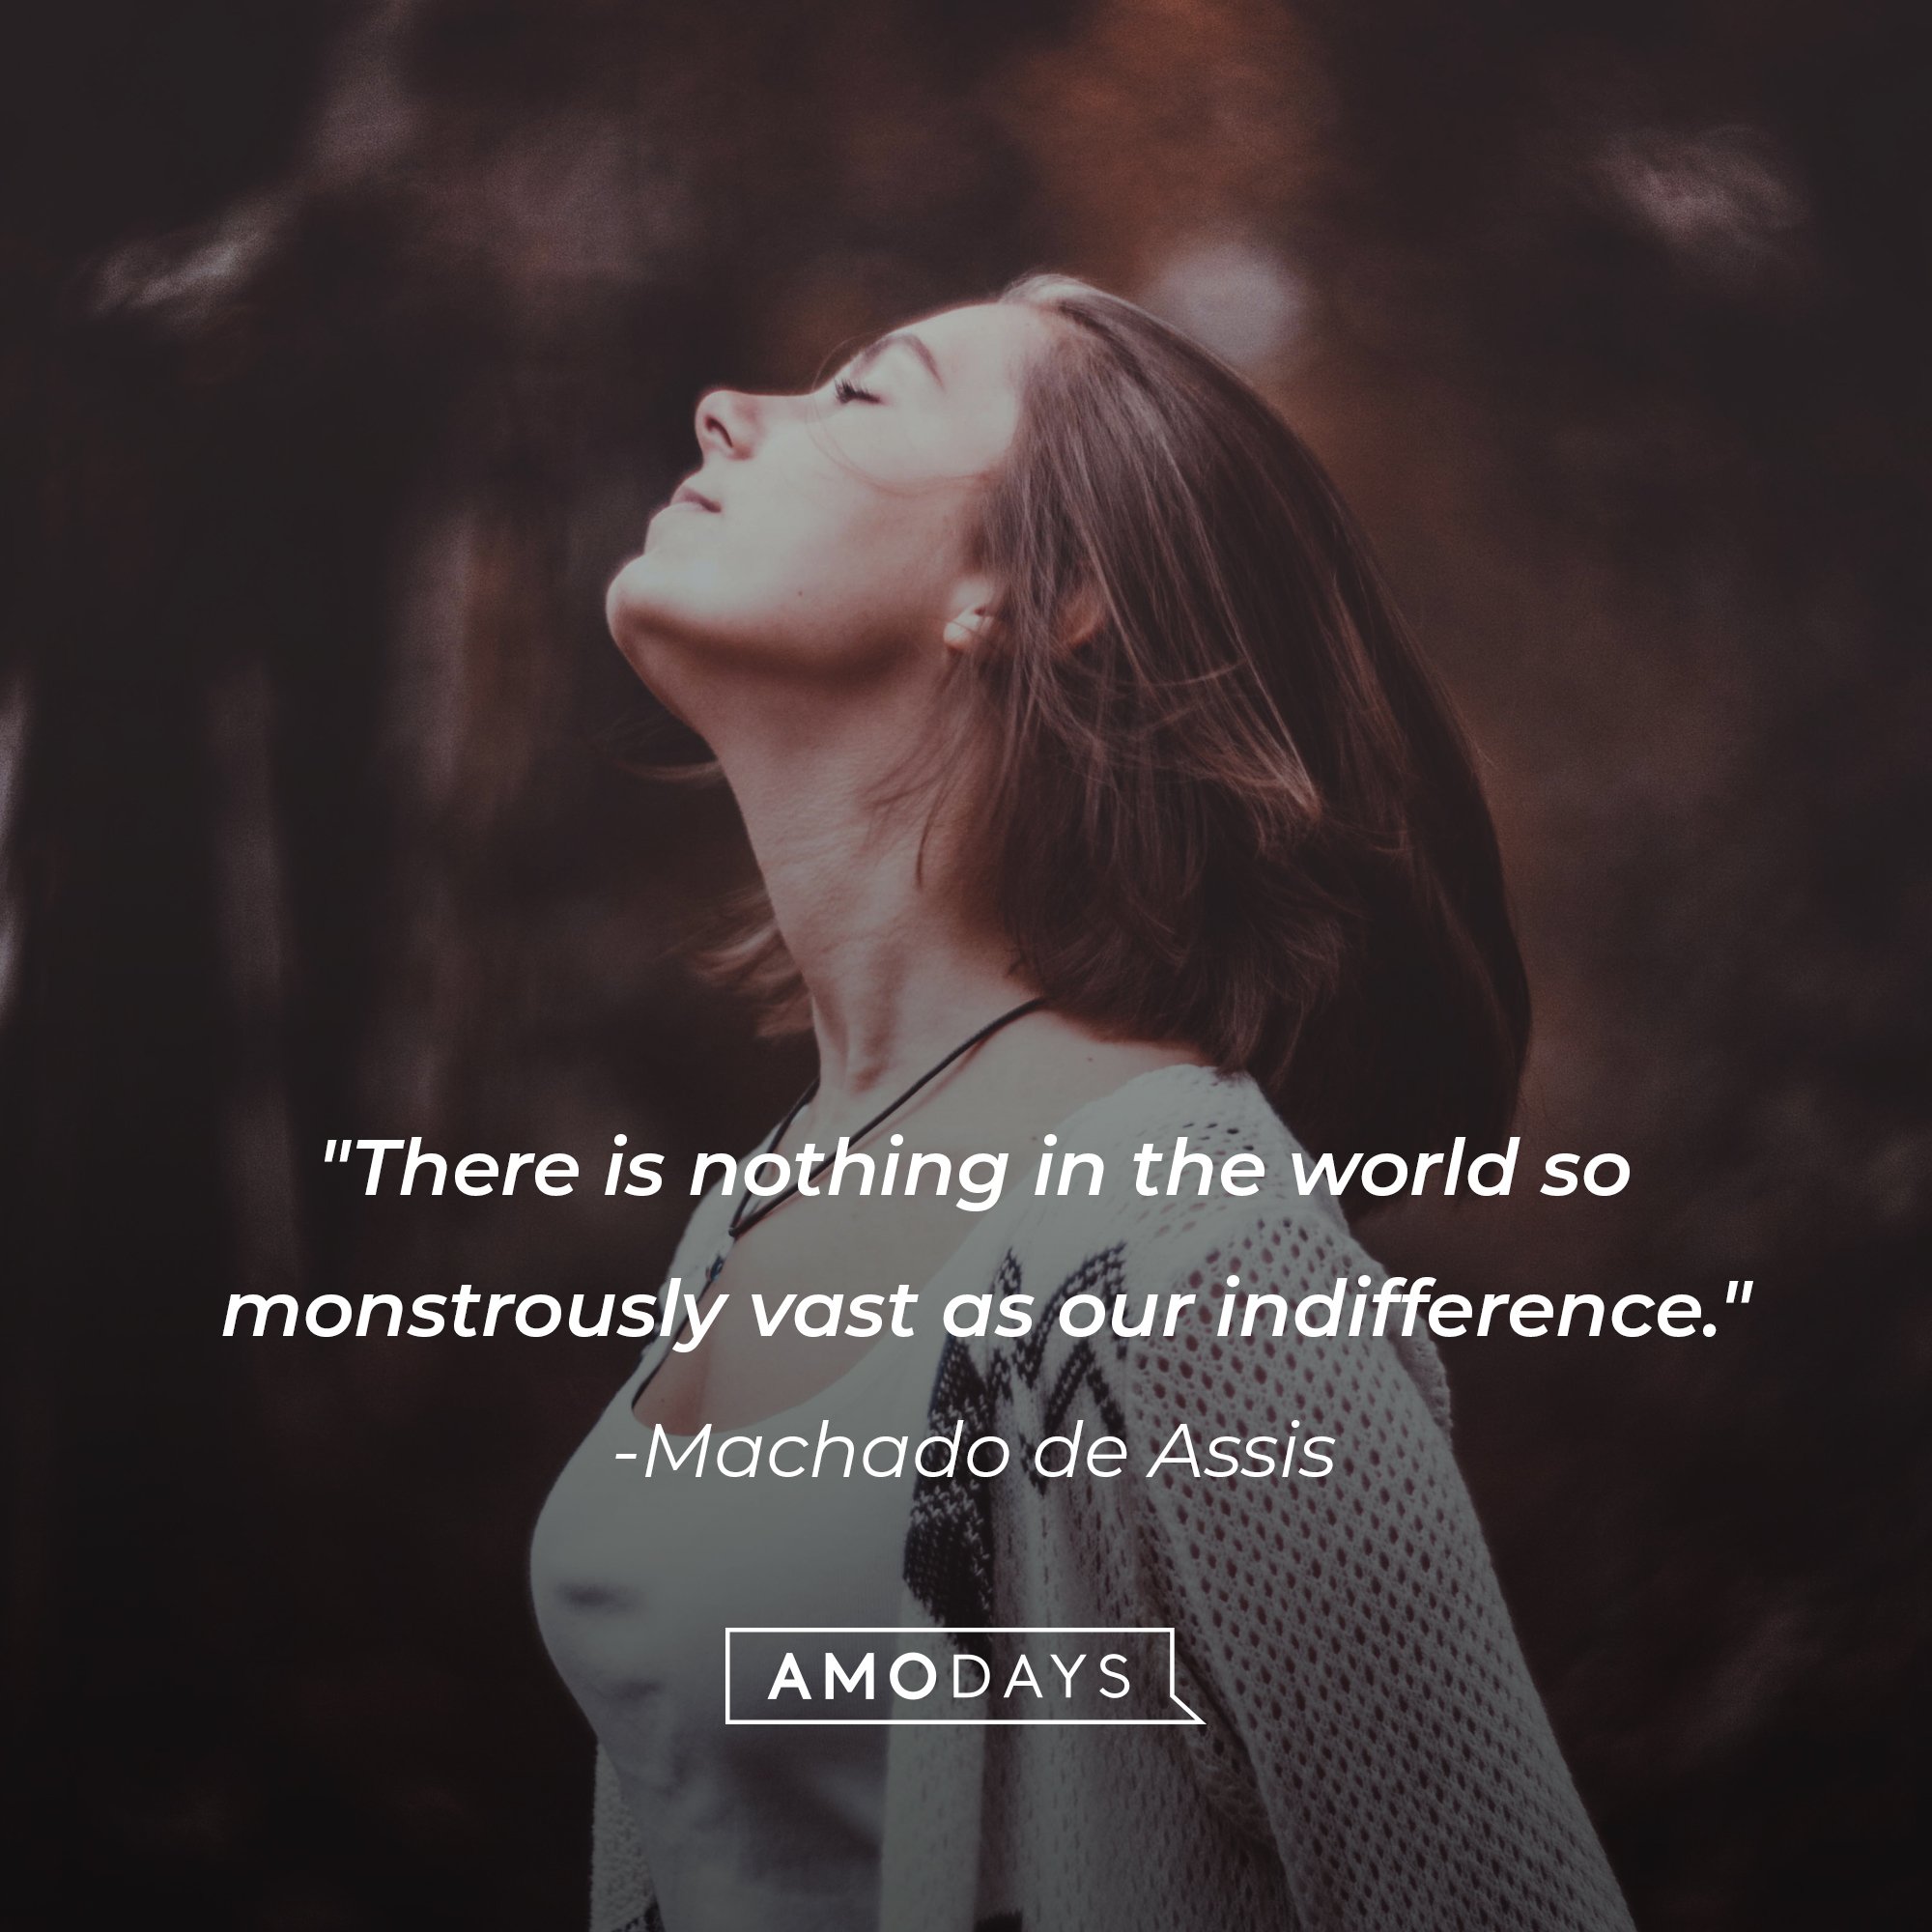 Machado de Assis's quote: "There is nothing in the world so monstrously vast as our indifference." | Image: AmoDays